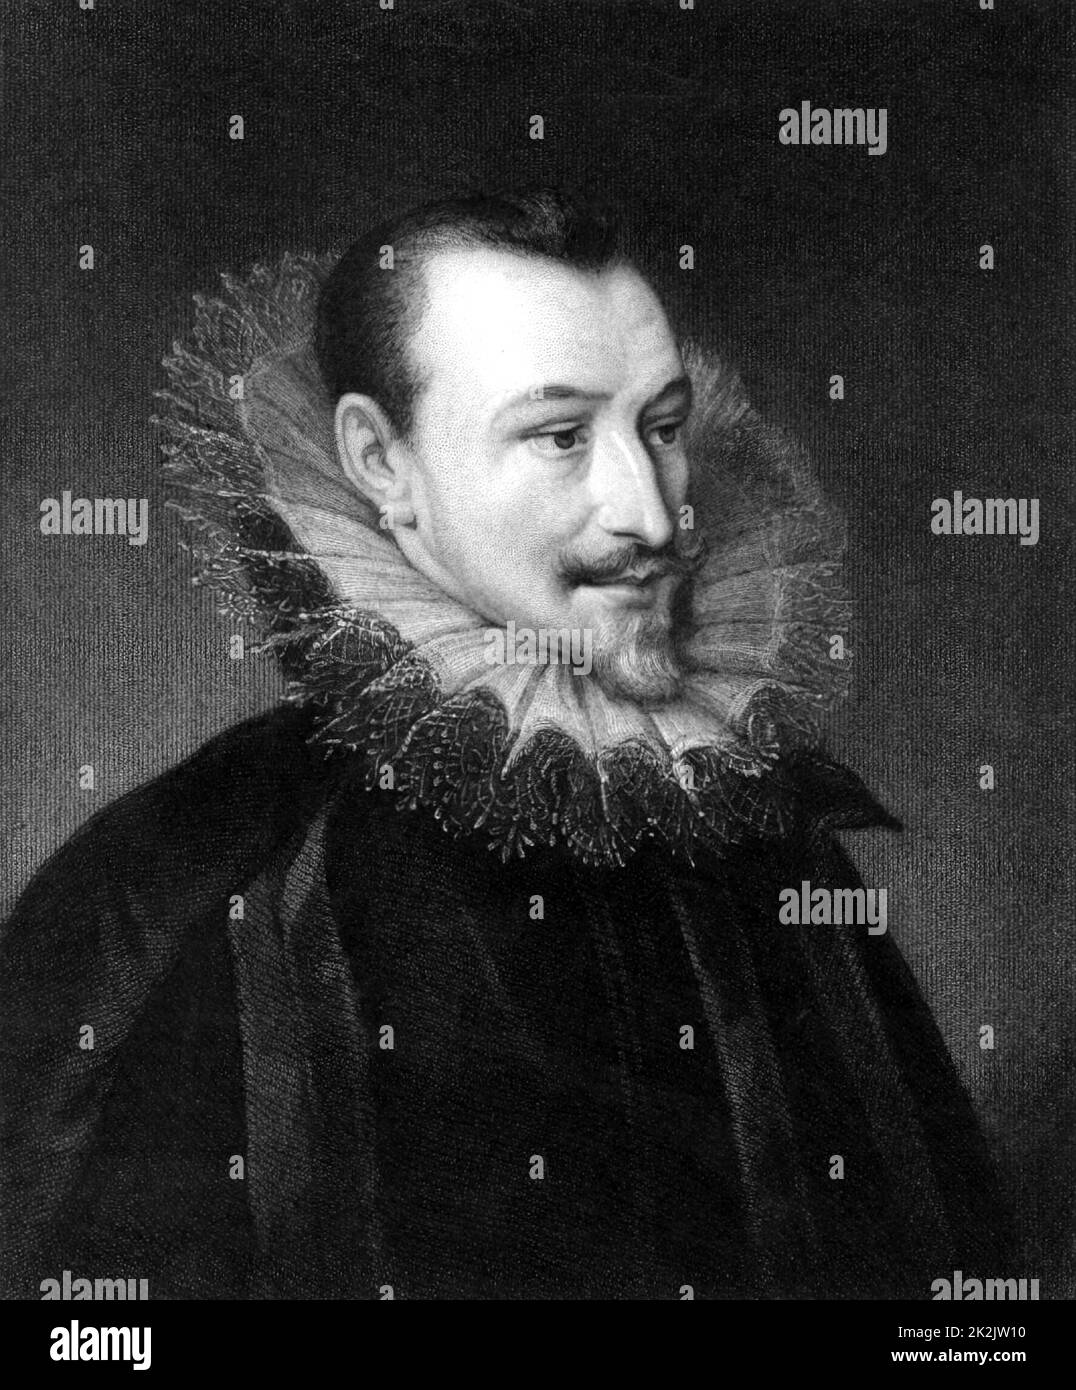 Edmund Spenser (1552?-1599) English Elizabethan poet. Engraving from 'The Gallery of Portraits' Vol. IV, by Charles Knight (London, 1835). Stock Photo